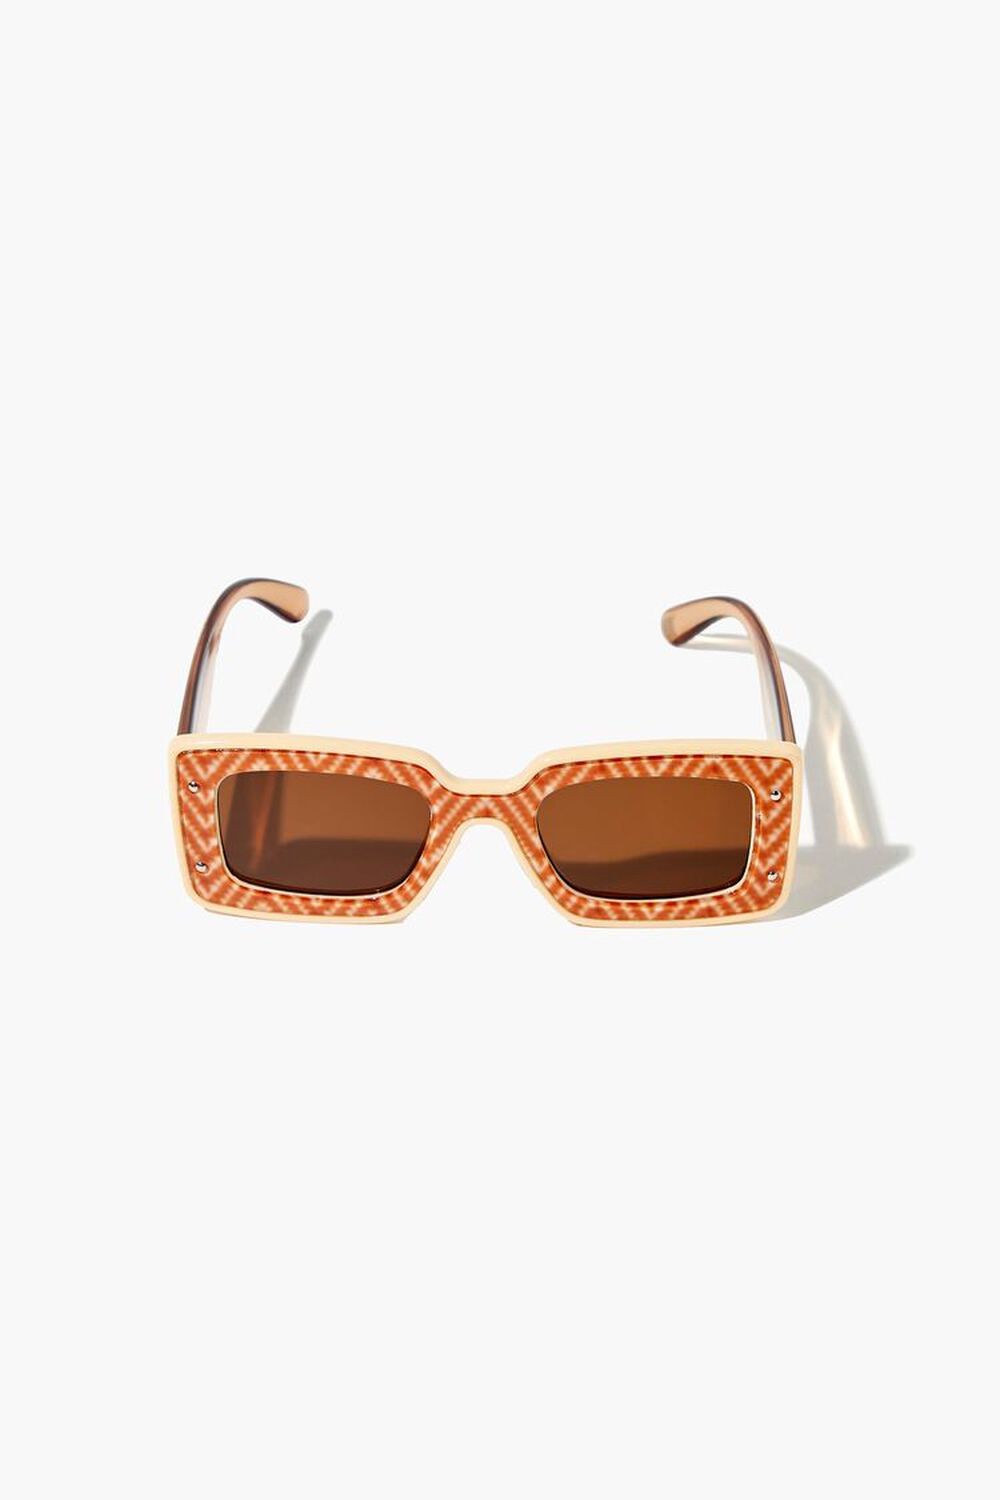 RUST/BROWN Abstract Print Sunglasses, image 1